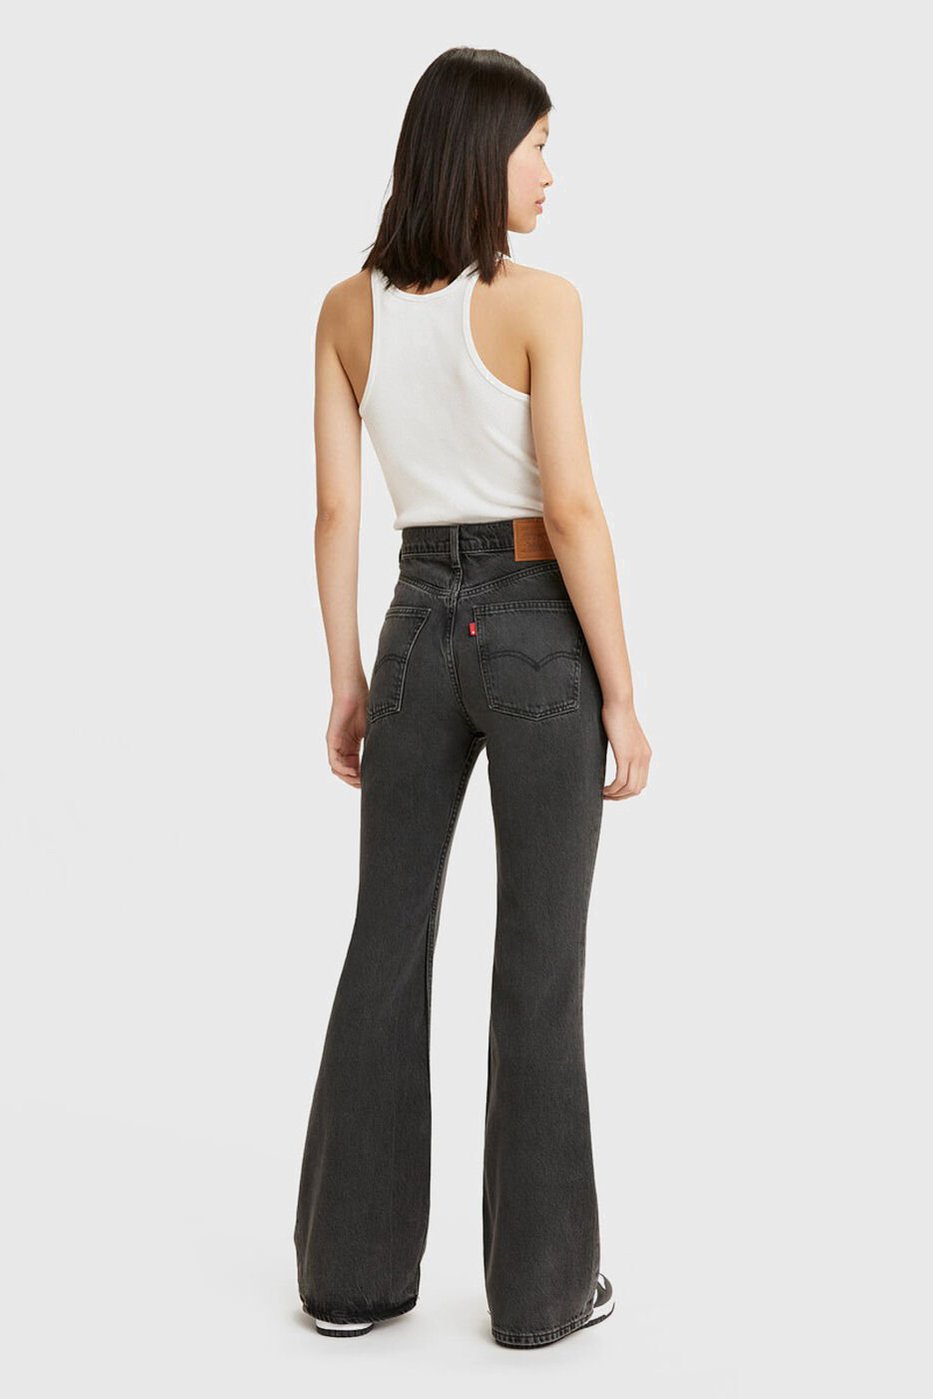 Levi's 70's High Rise Flare - Such A Doozie